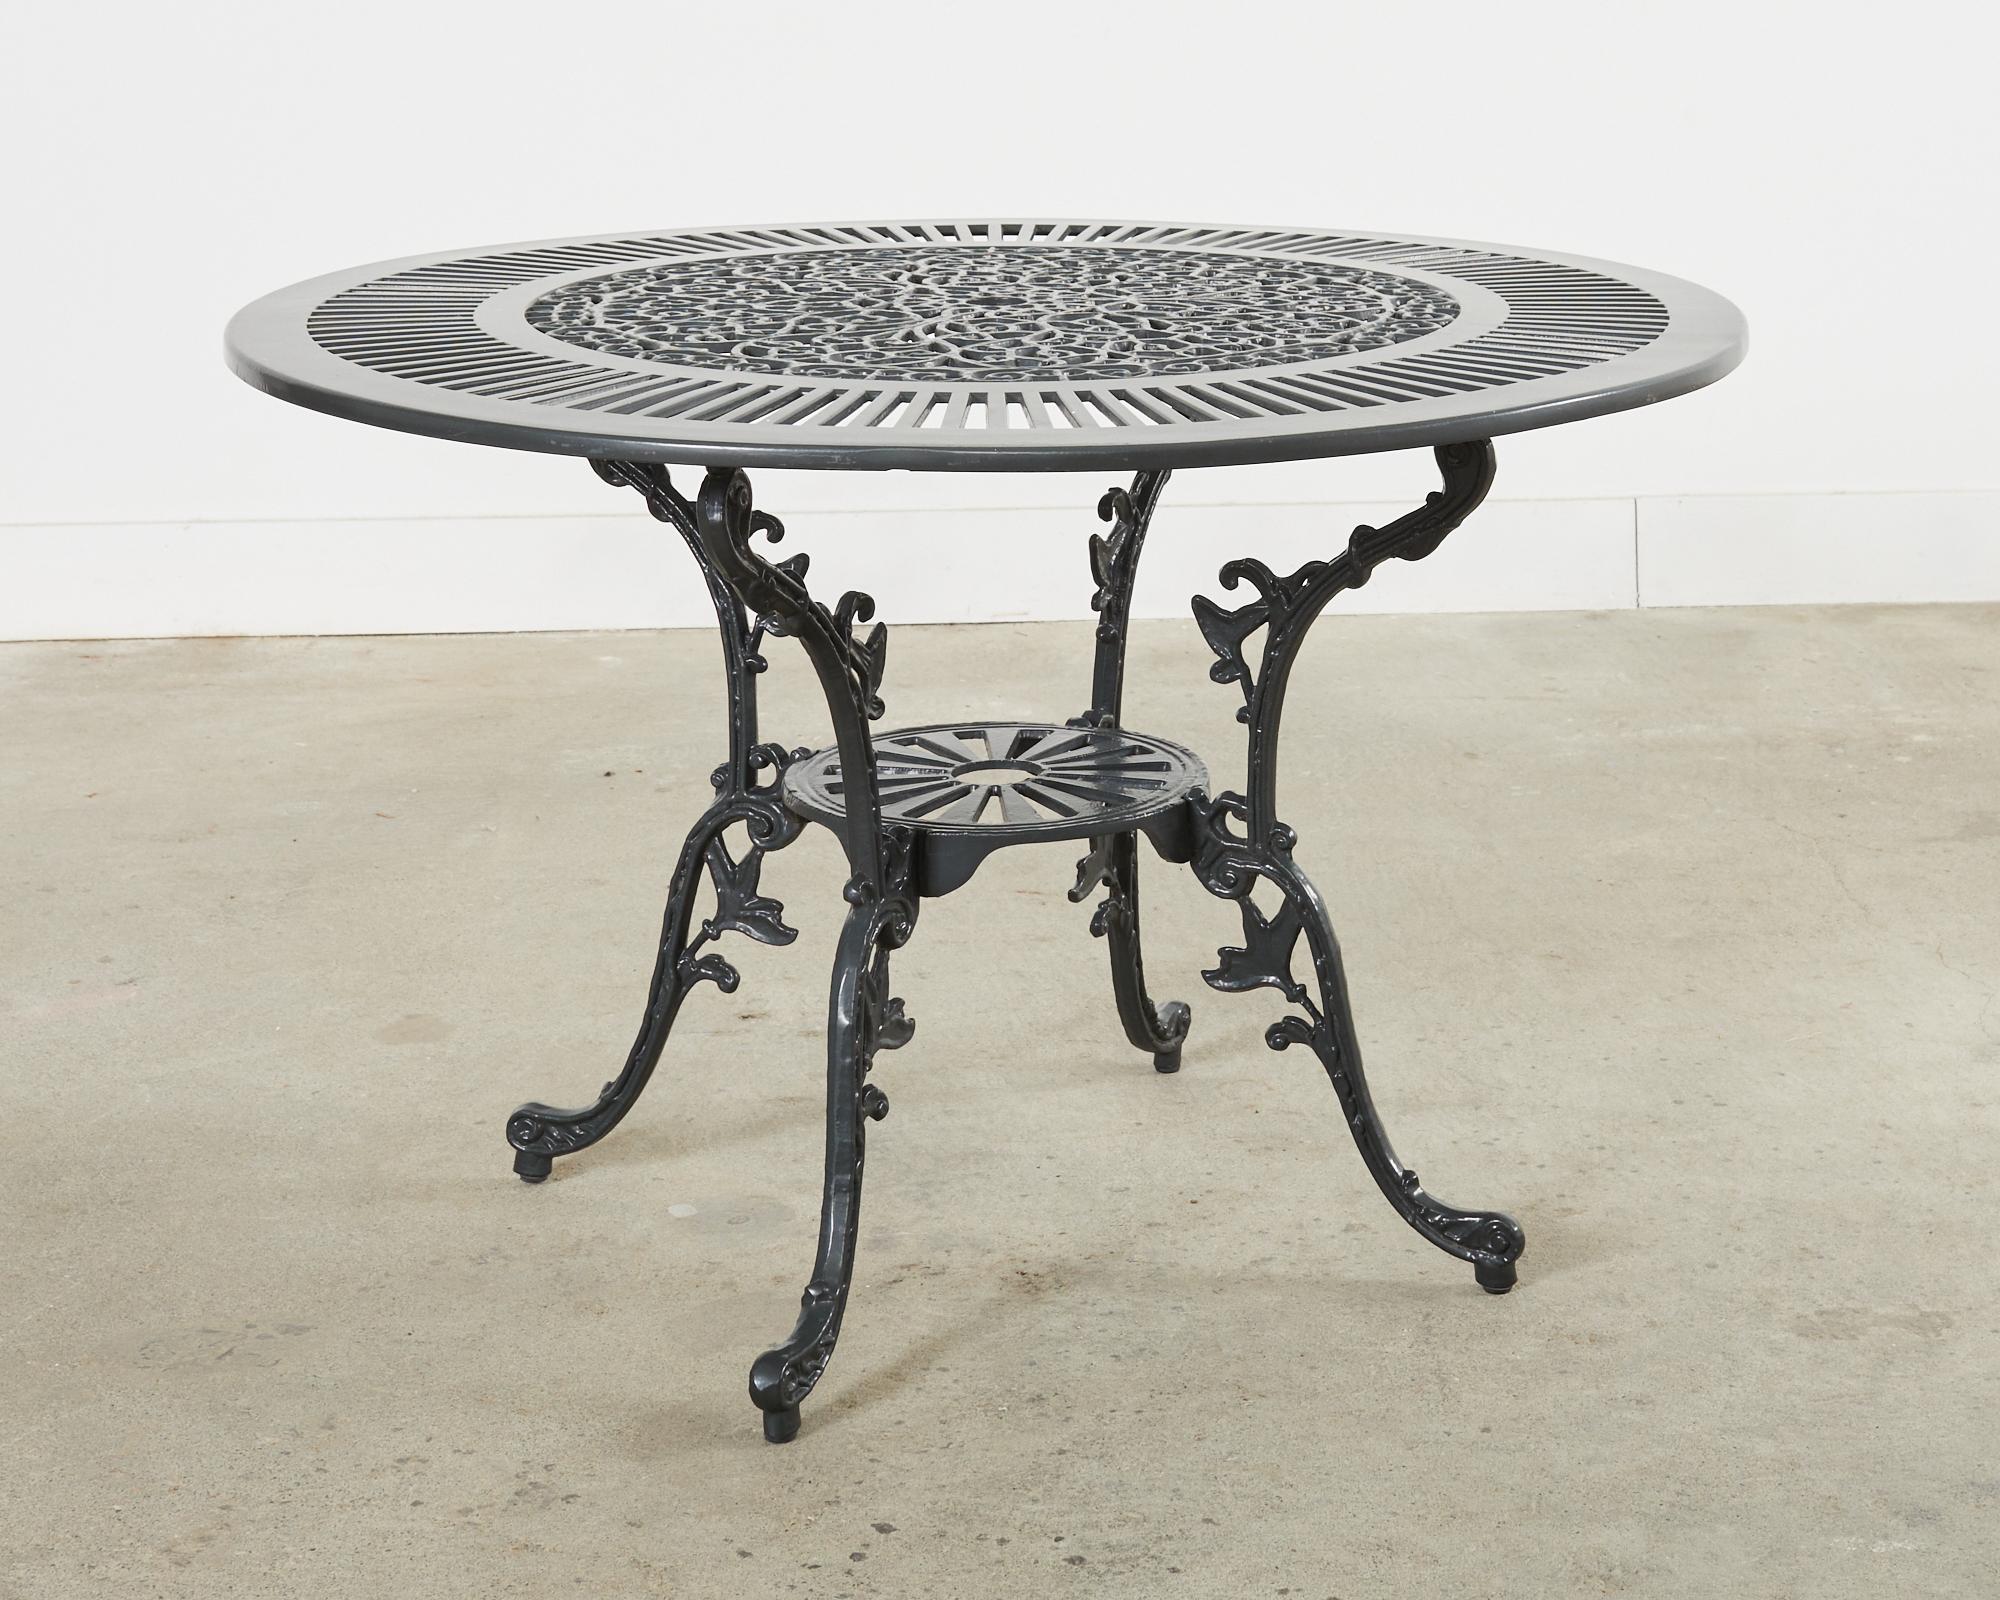 Neoclassical Style Round Aluminum Patio Garden Dining Table In Good Condition For Sale In Rio Vista, CA